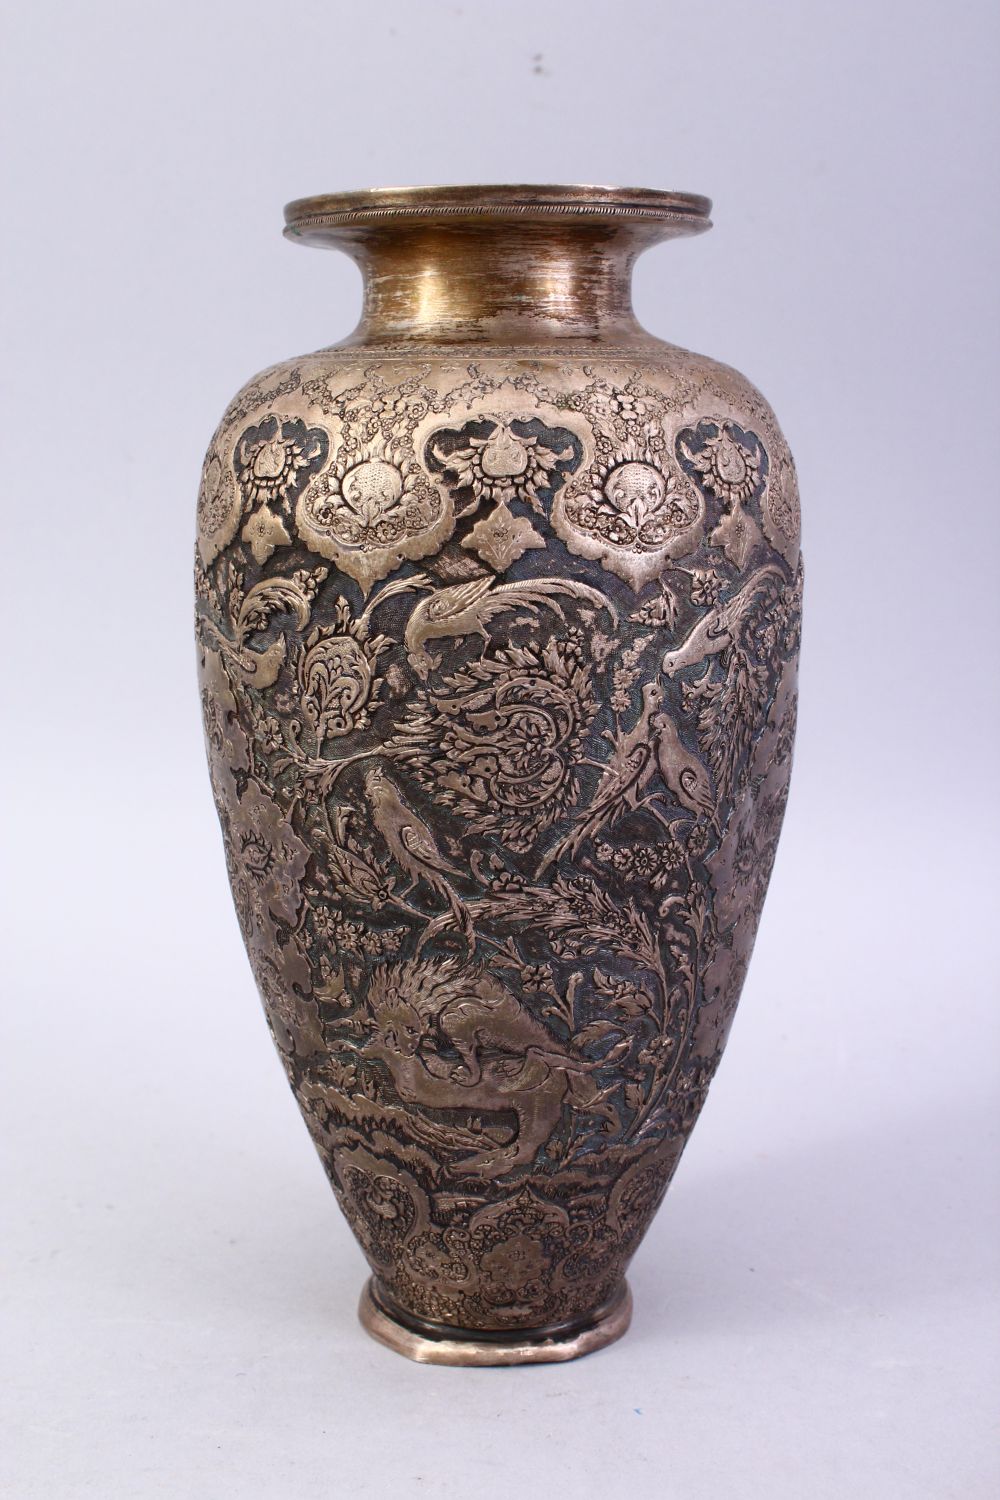 A 18TH / 19TH CENTURY IRANIAN CARVED SILVER VASE, with a multitude of decoration depicting flora and - Image 2 of 12